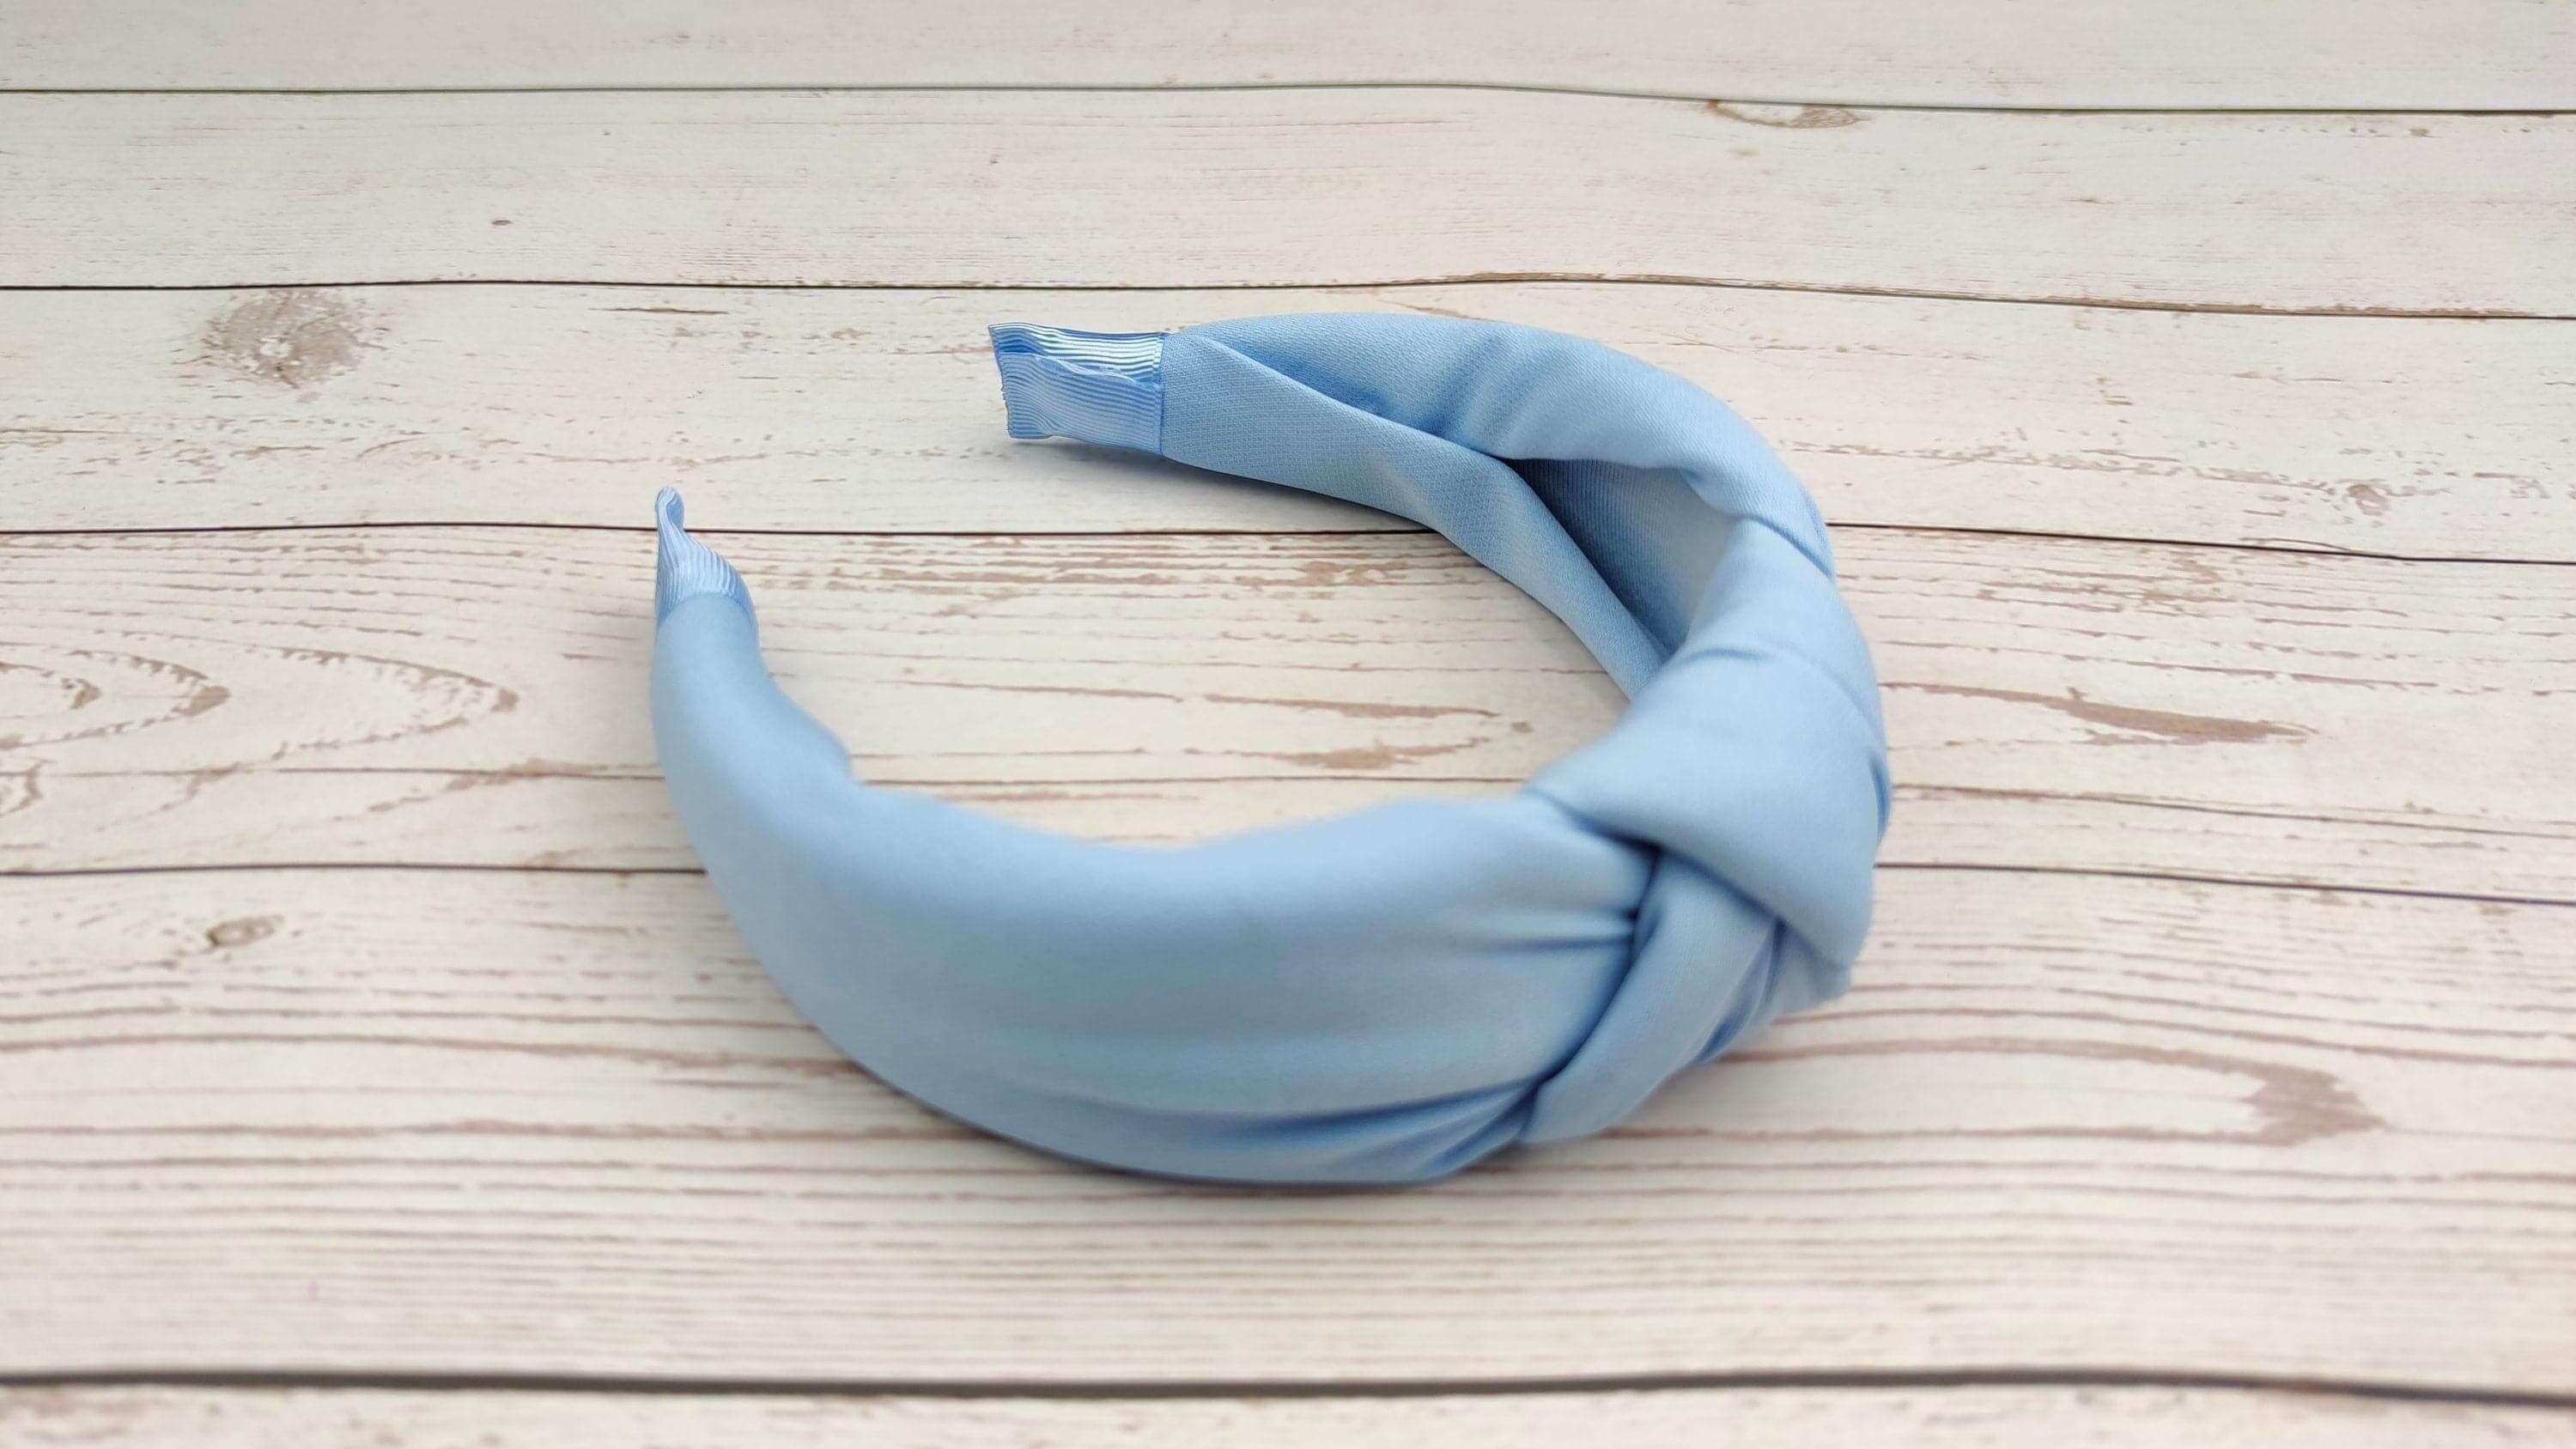 Luxurious Light Blue Twist Knot Headband - Classic Women's Hairband in Bright Fashionable Color - Viscose Crepe Padded for Comfort available at Moyoni Design